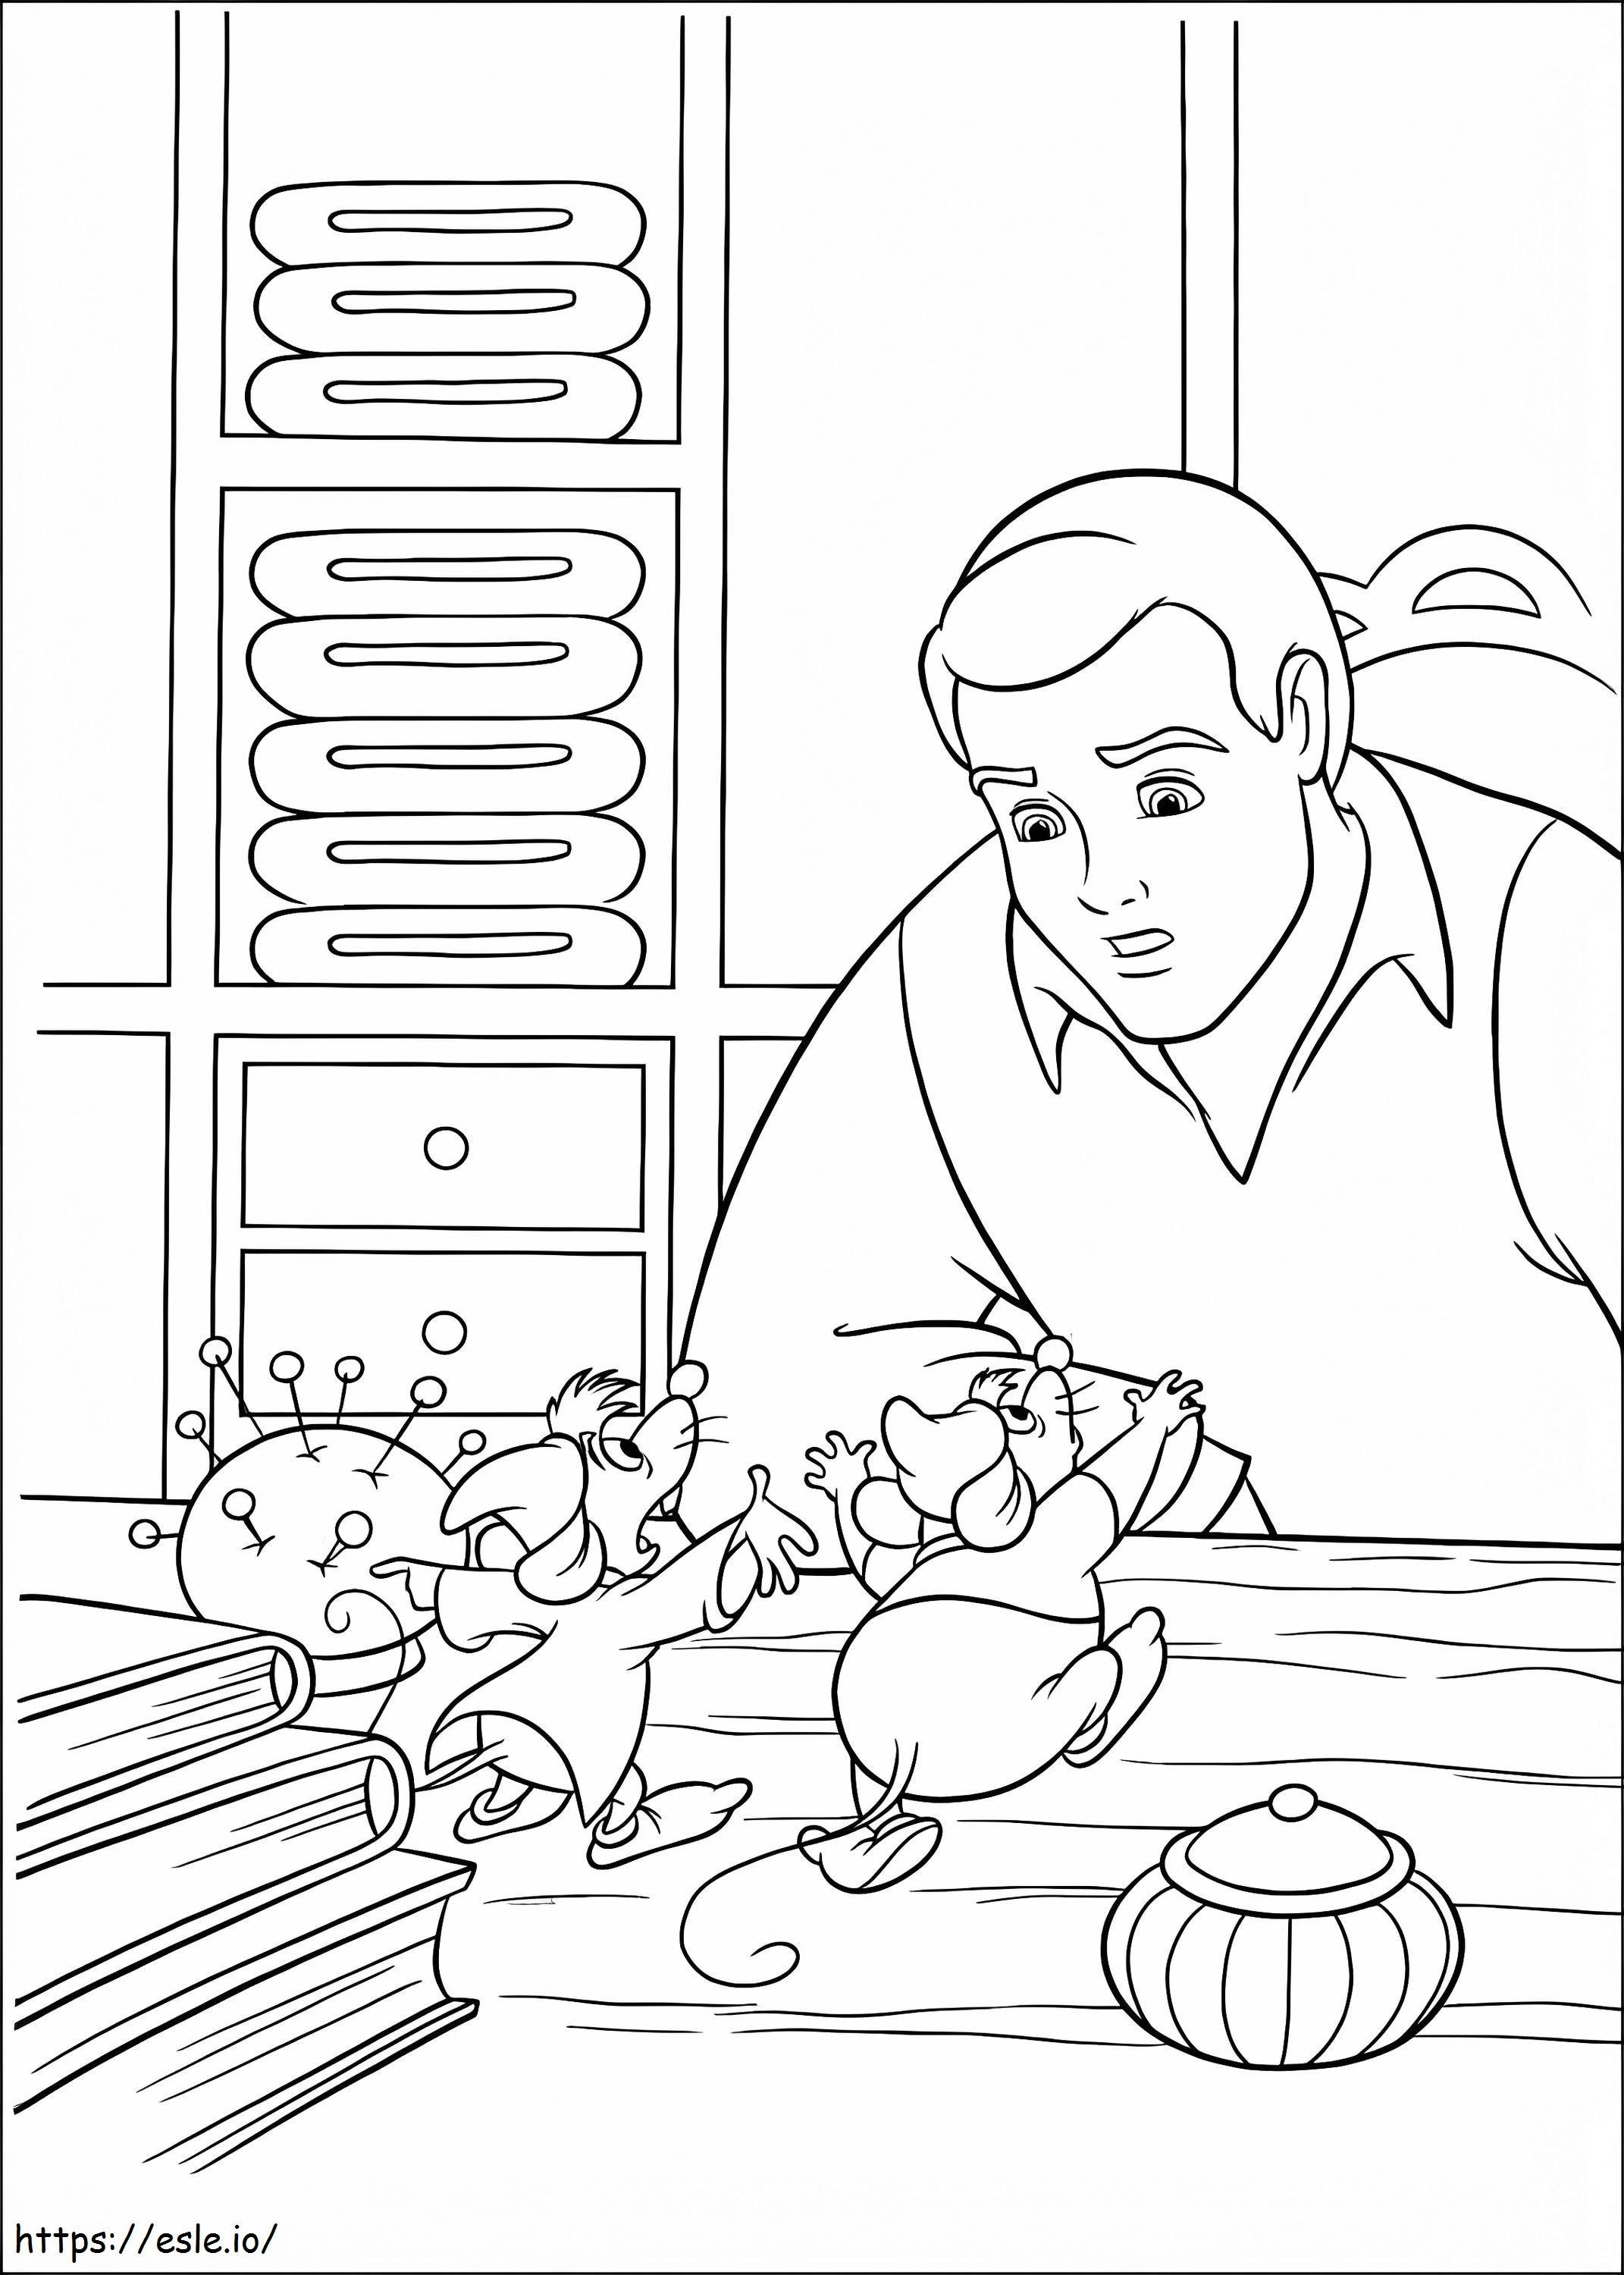 Prince Charming And The Mice coloring page